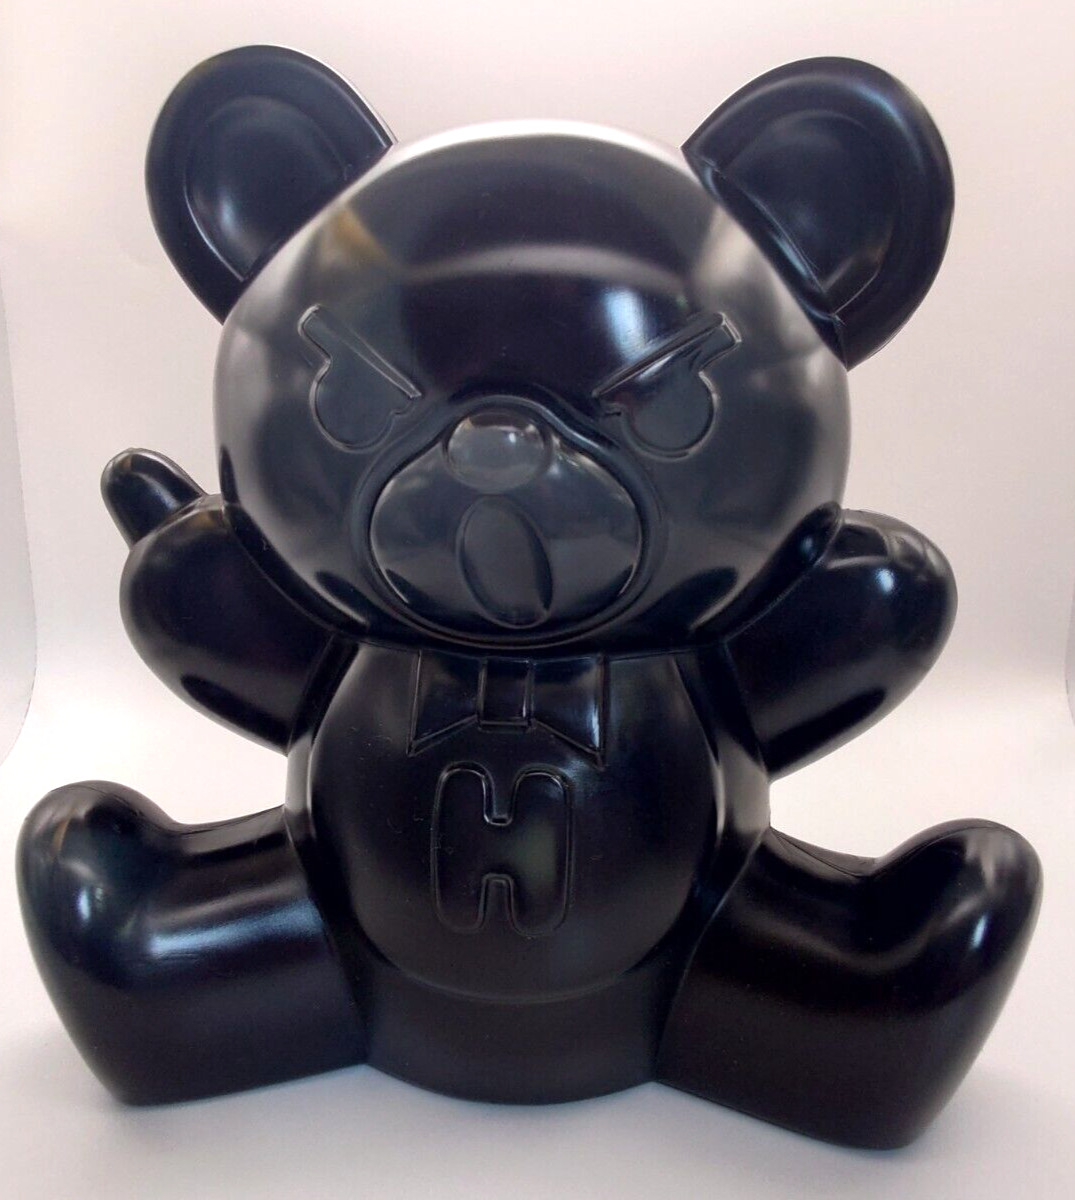 HYSTERIC GLAMOUR Novelty Hysteric Bear Black Sweets Container Without box  Japan